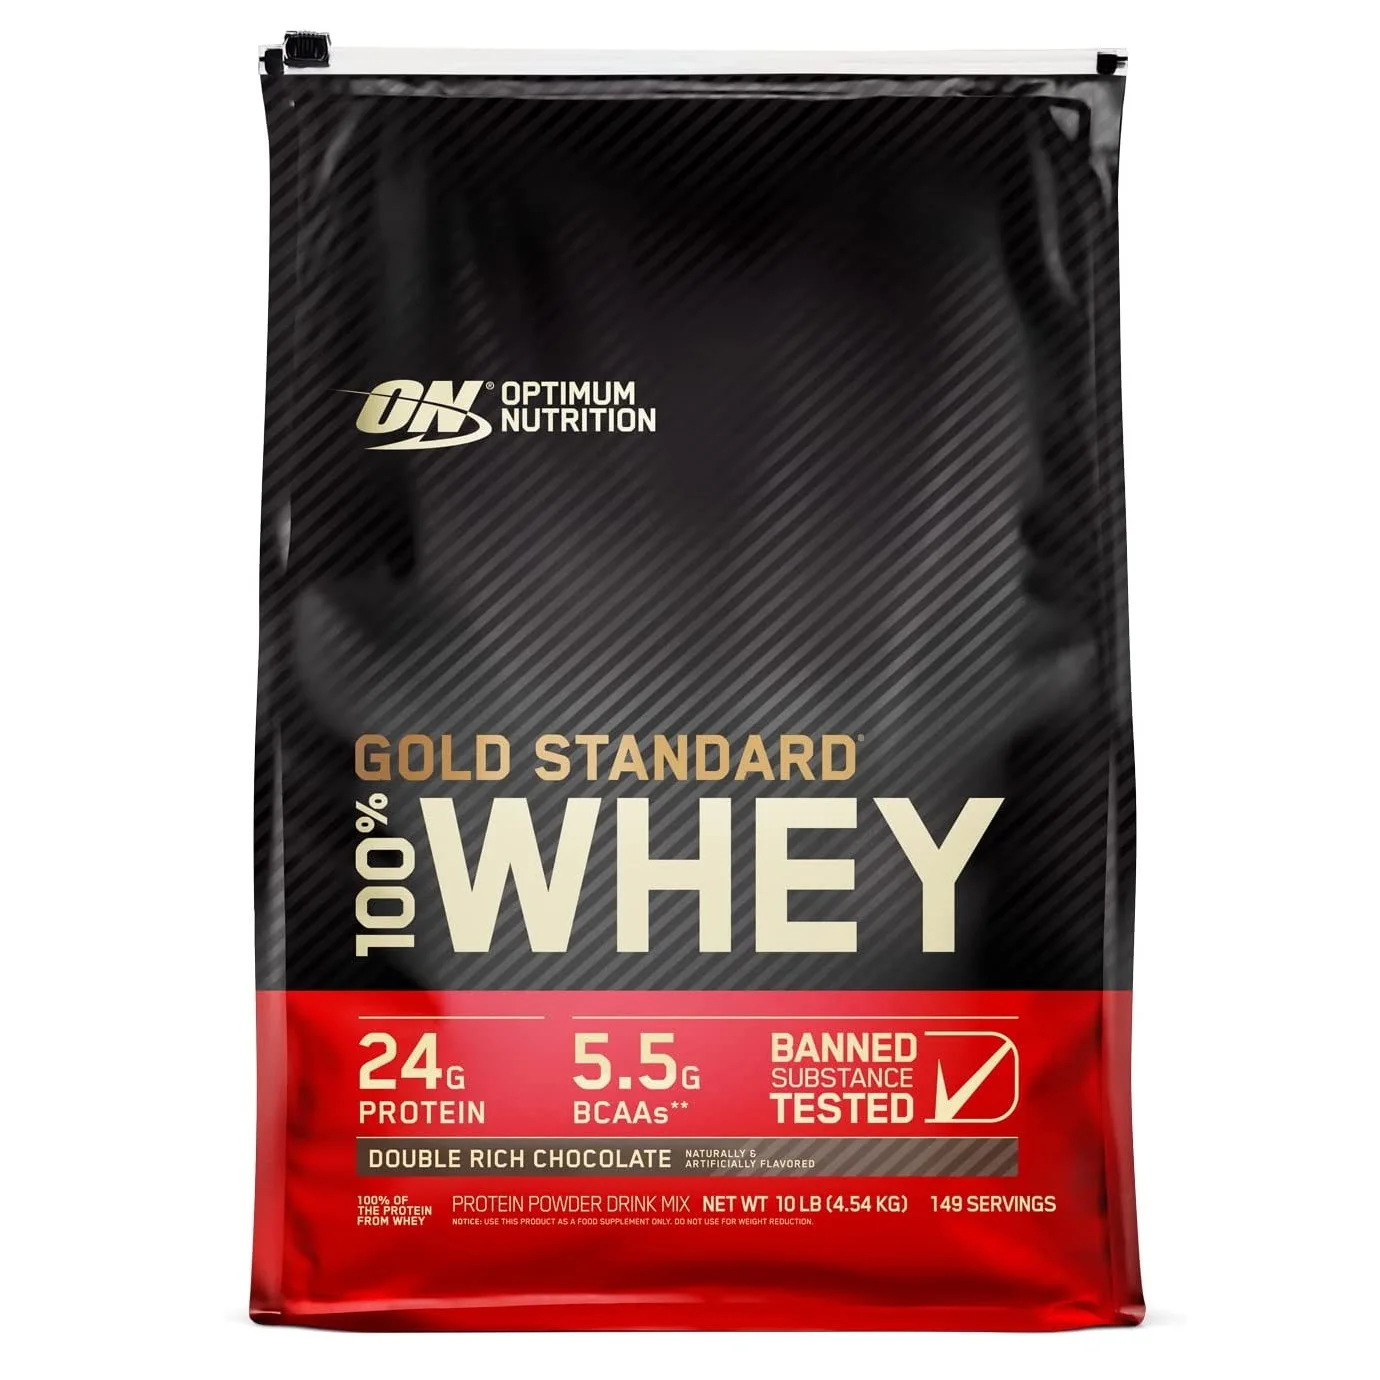 Wholesale Supplier Of Bulk Stock of Whey Protein Powder / Whey Protein Isolate Fast Shipping